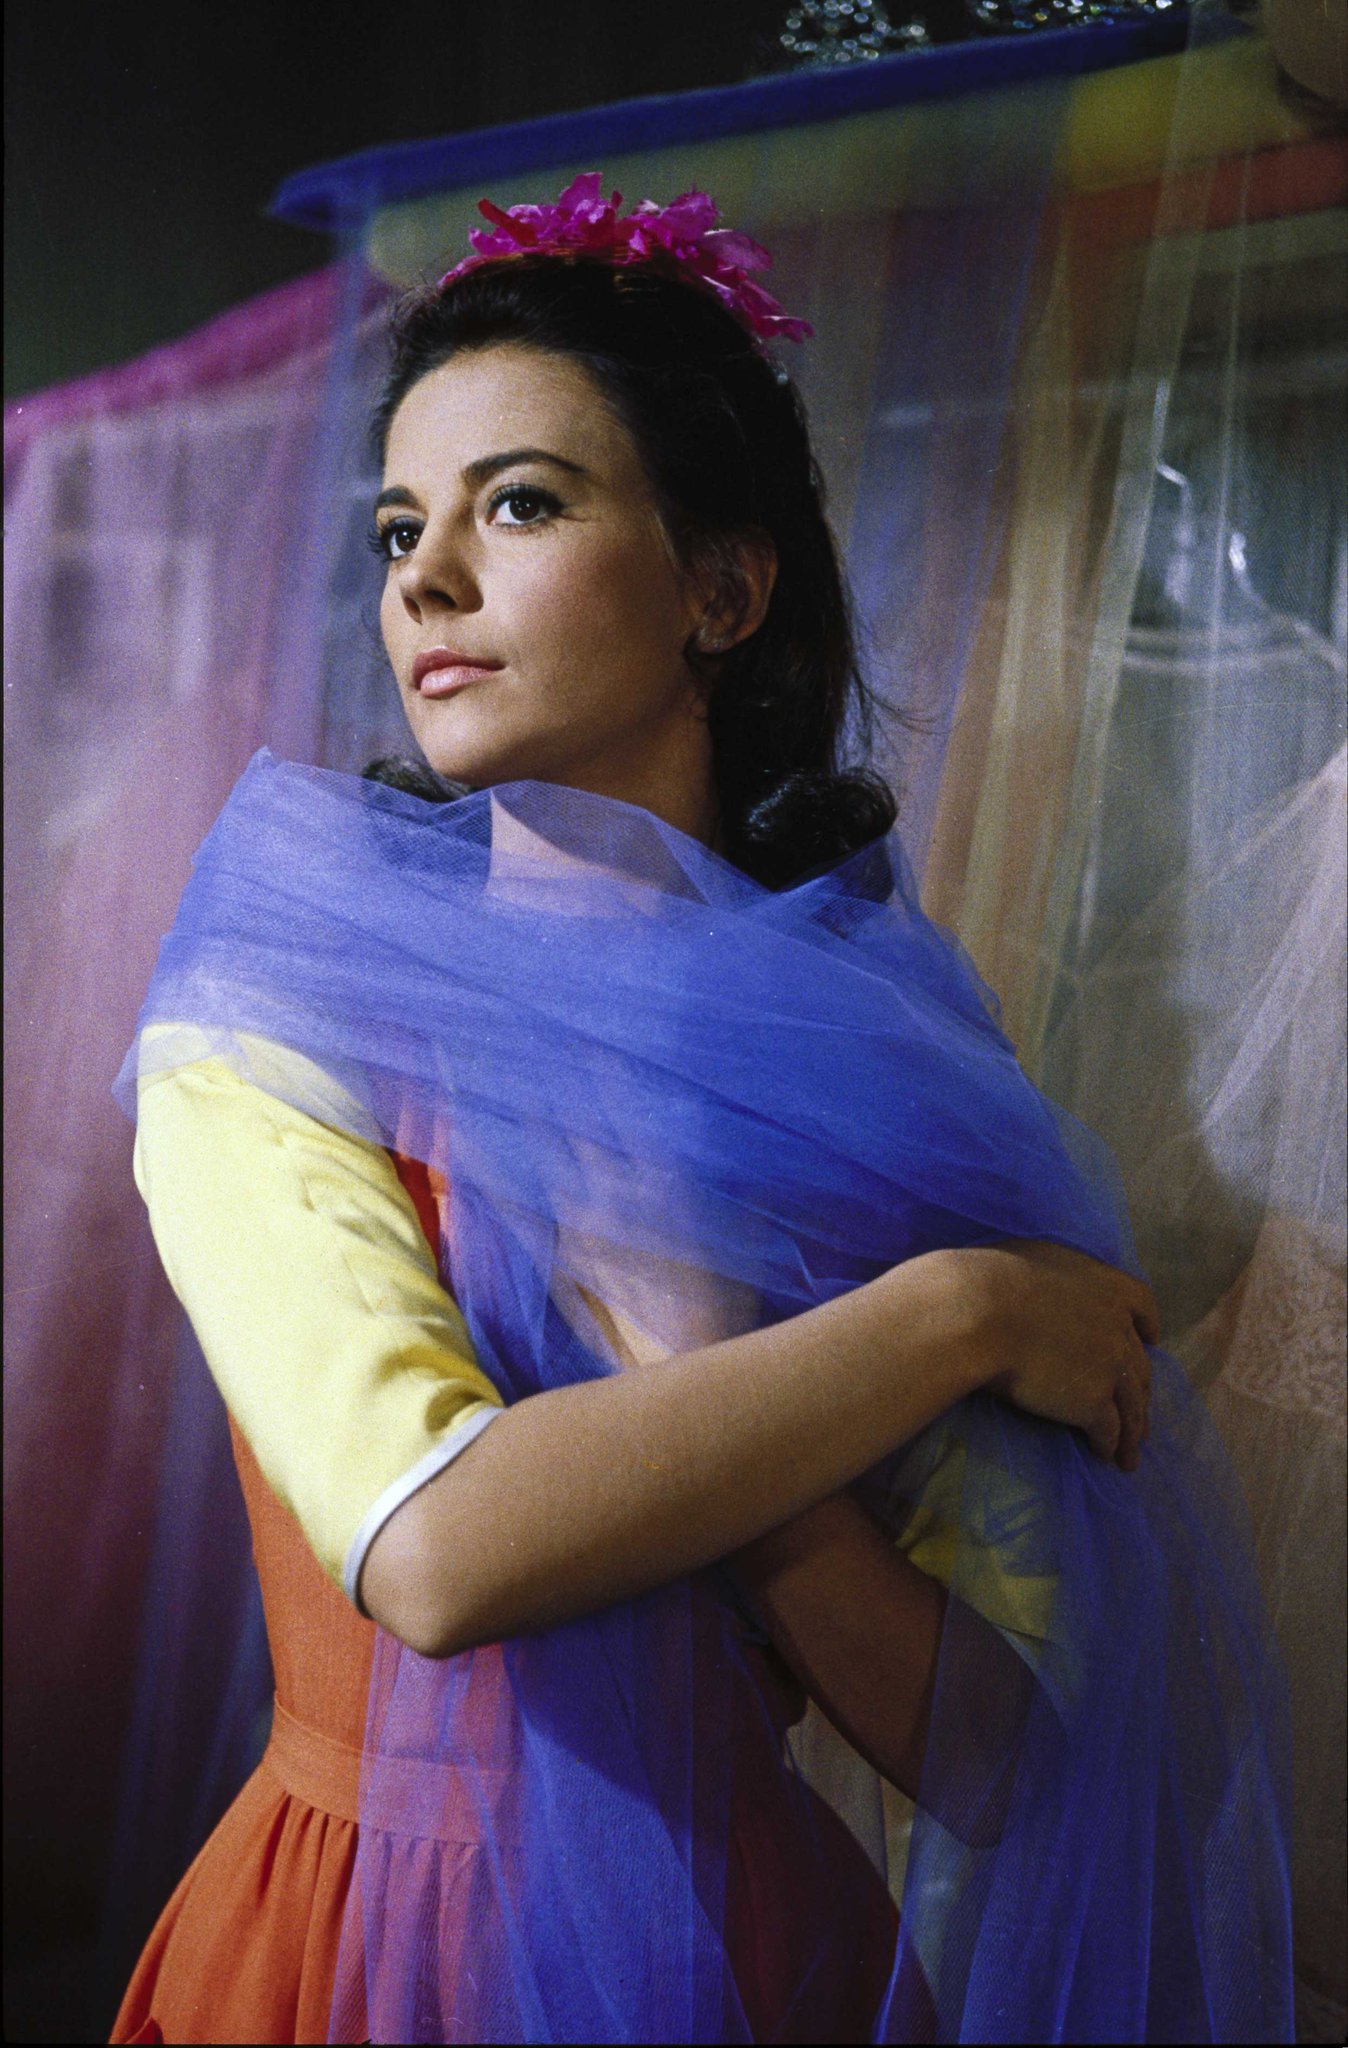 Happy Birthday Natalie Wood! What is your favorite role of hers? We love Maria in West Side Story! 